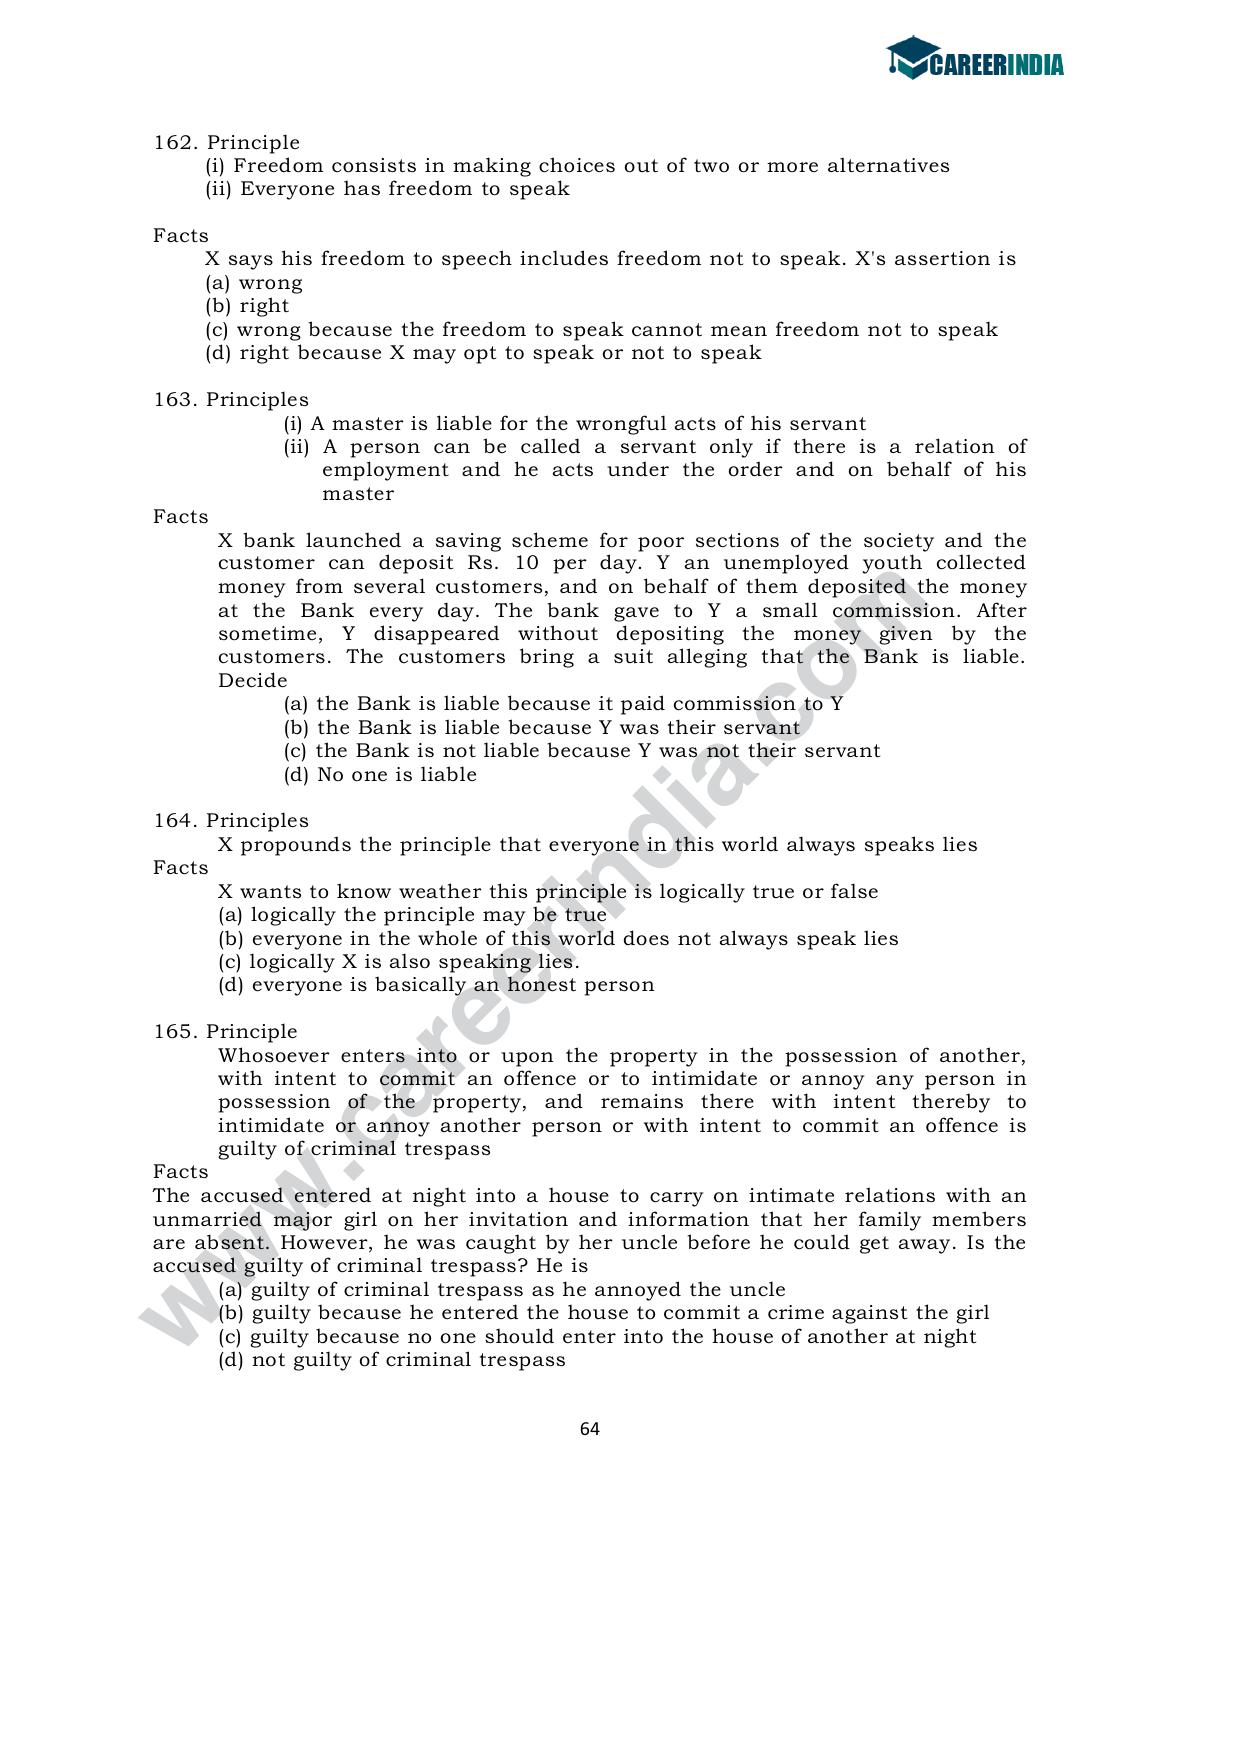 CLAT 2010 UG Sample Question Paper - Page 17